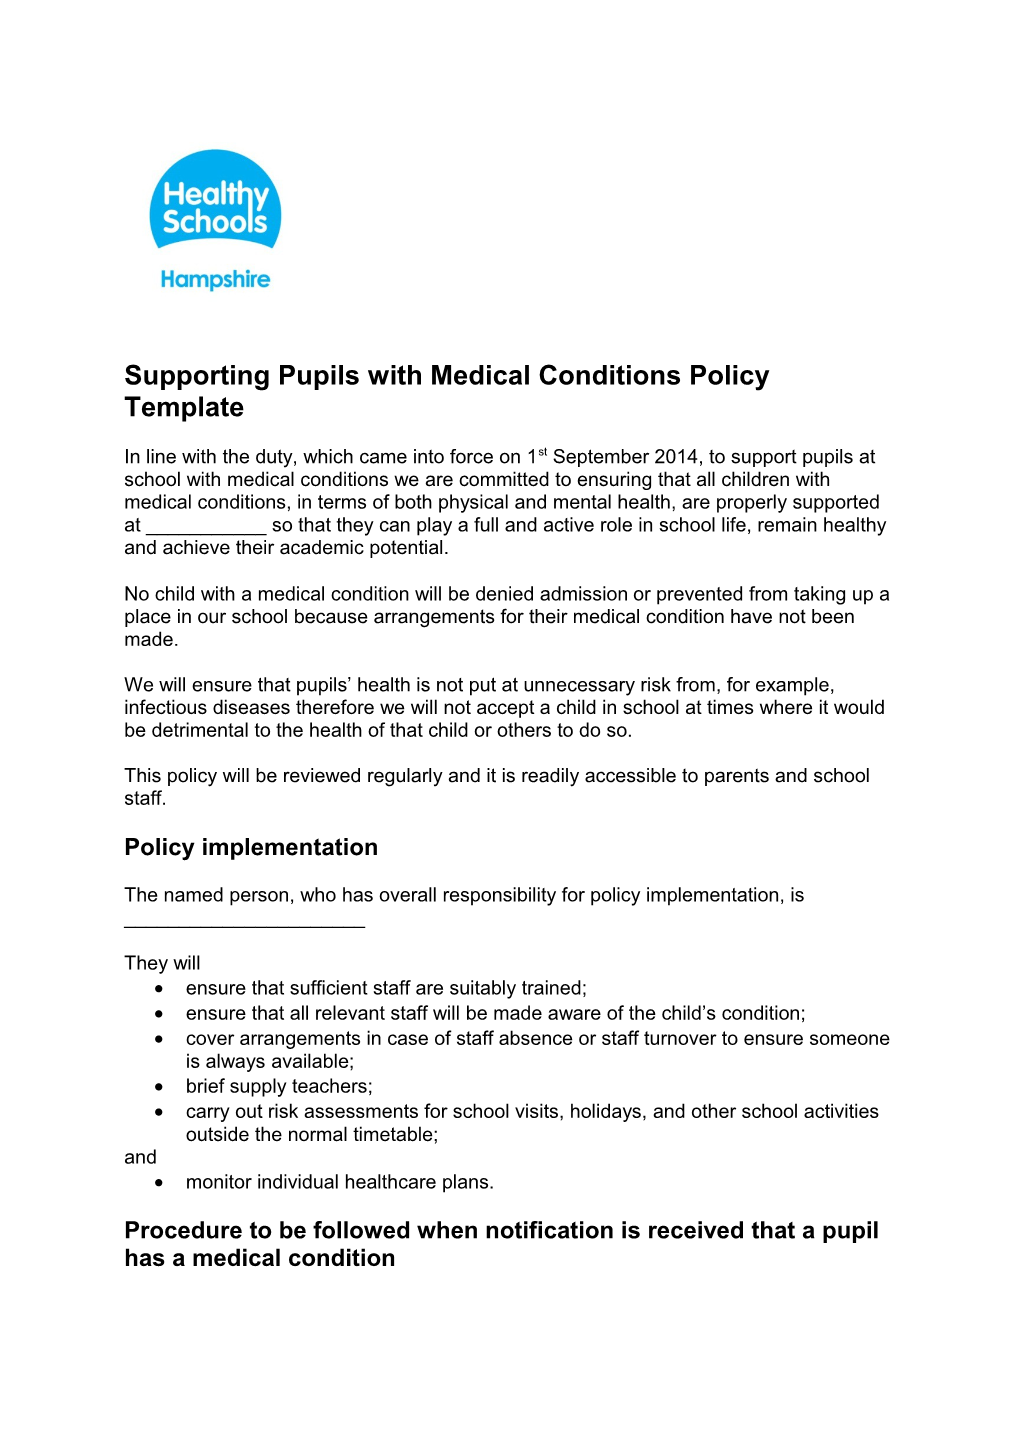 Supporting Pupils with Medical Conditions Policy Template